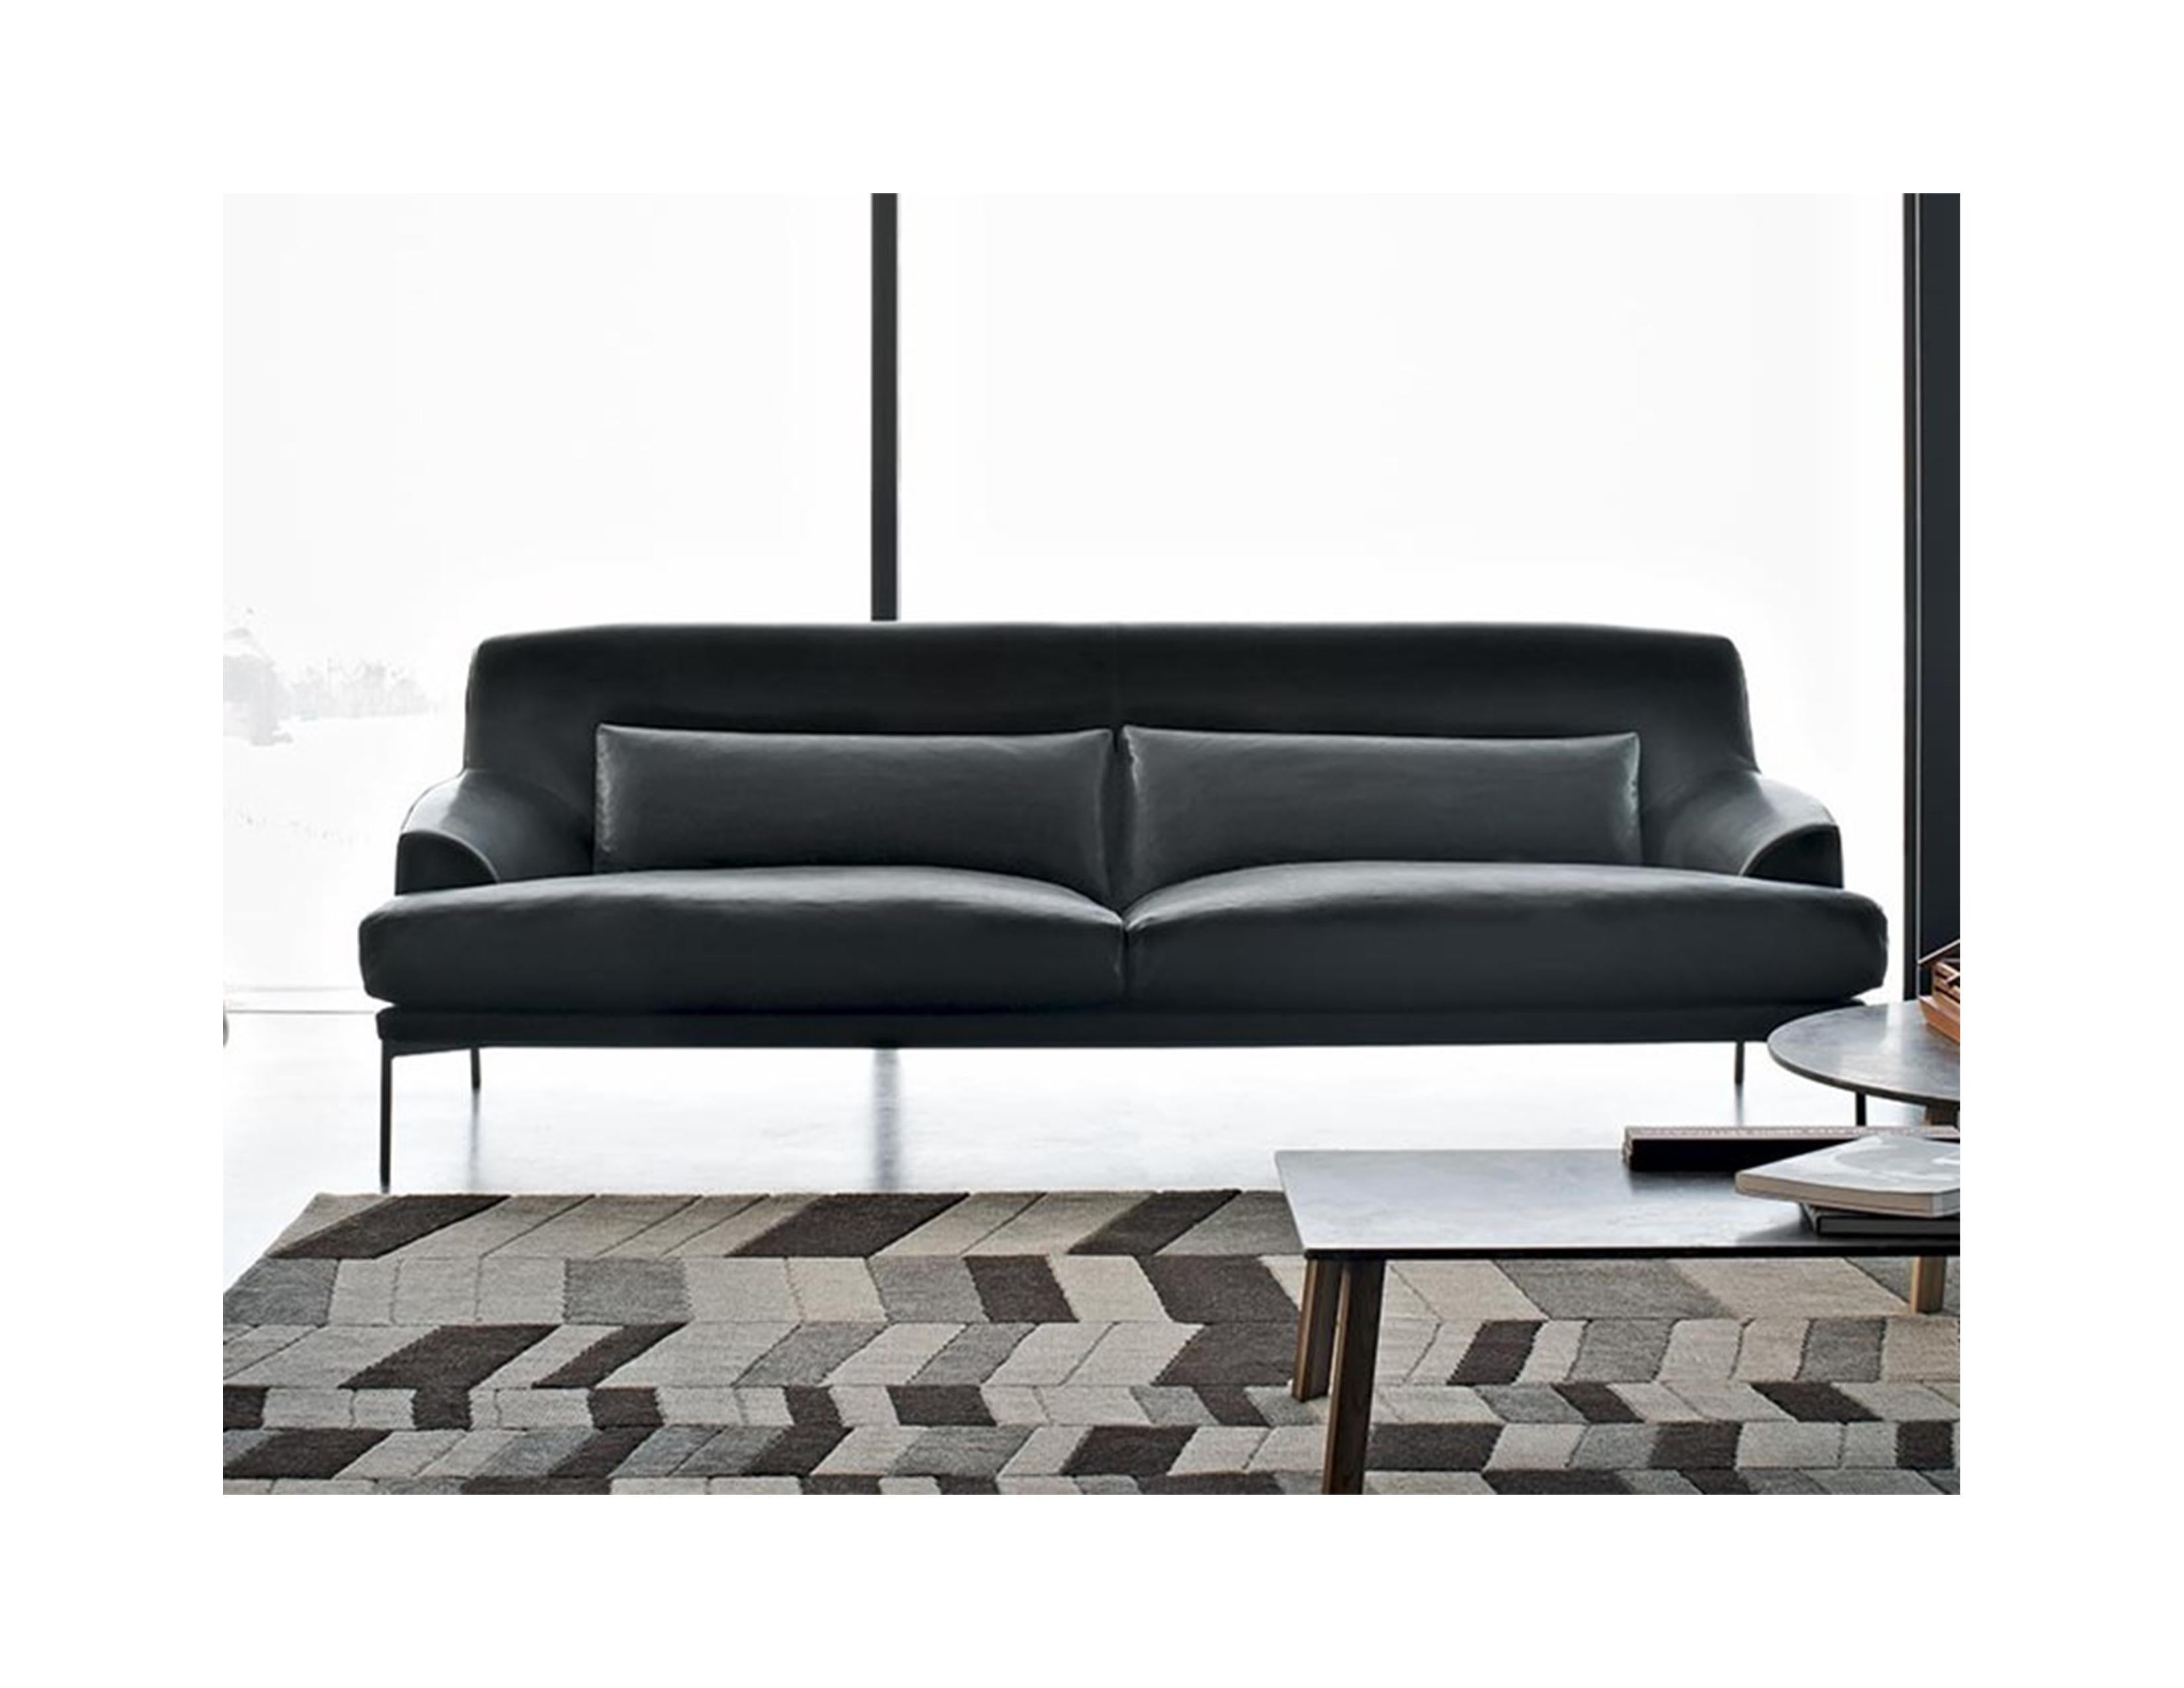 Carefully designed shapes and sizes for all-round comfort: this is the guiding principle behind the Montevideo sofa. Armrests and backrest trace a soft and cozy outline, complete with feather cushions supporting your lower back. Ergonomic and